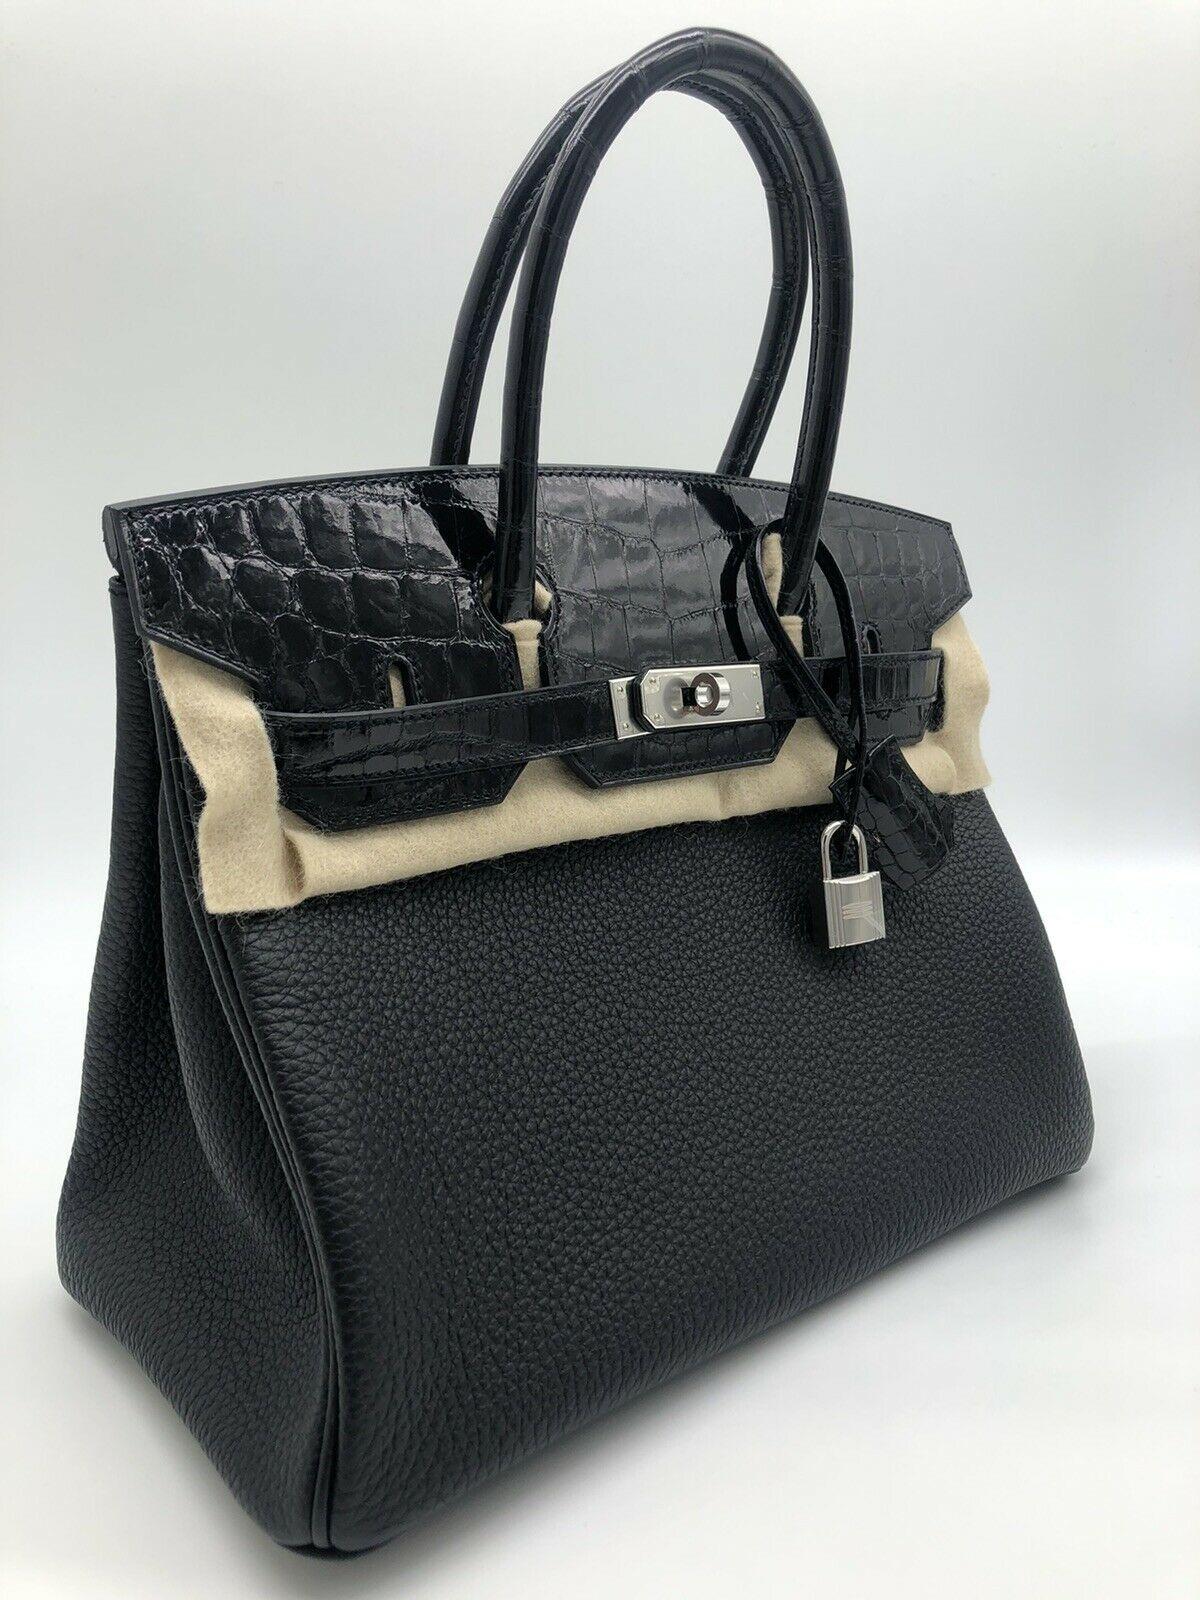 Absolutely gorgeous Hermes Birkin 30 Touch in black Togo Leather and black Crocodile Leather with Palladium hardware for sale. Brand New, Year 2020. 

BRAND	
Hermes

ACCESSORIES	
Box, Dustbag, Keys, Lock, Clochette, Raincover, Original